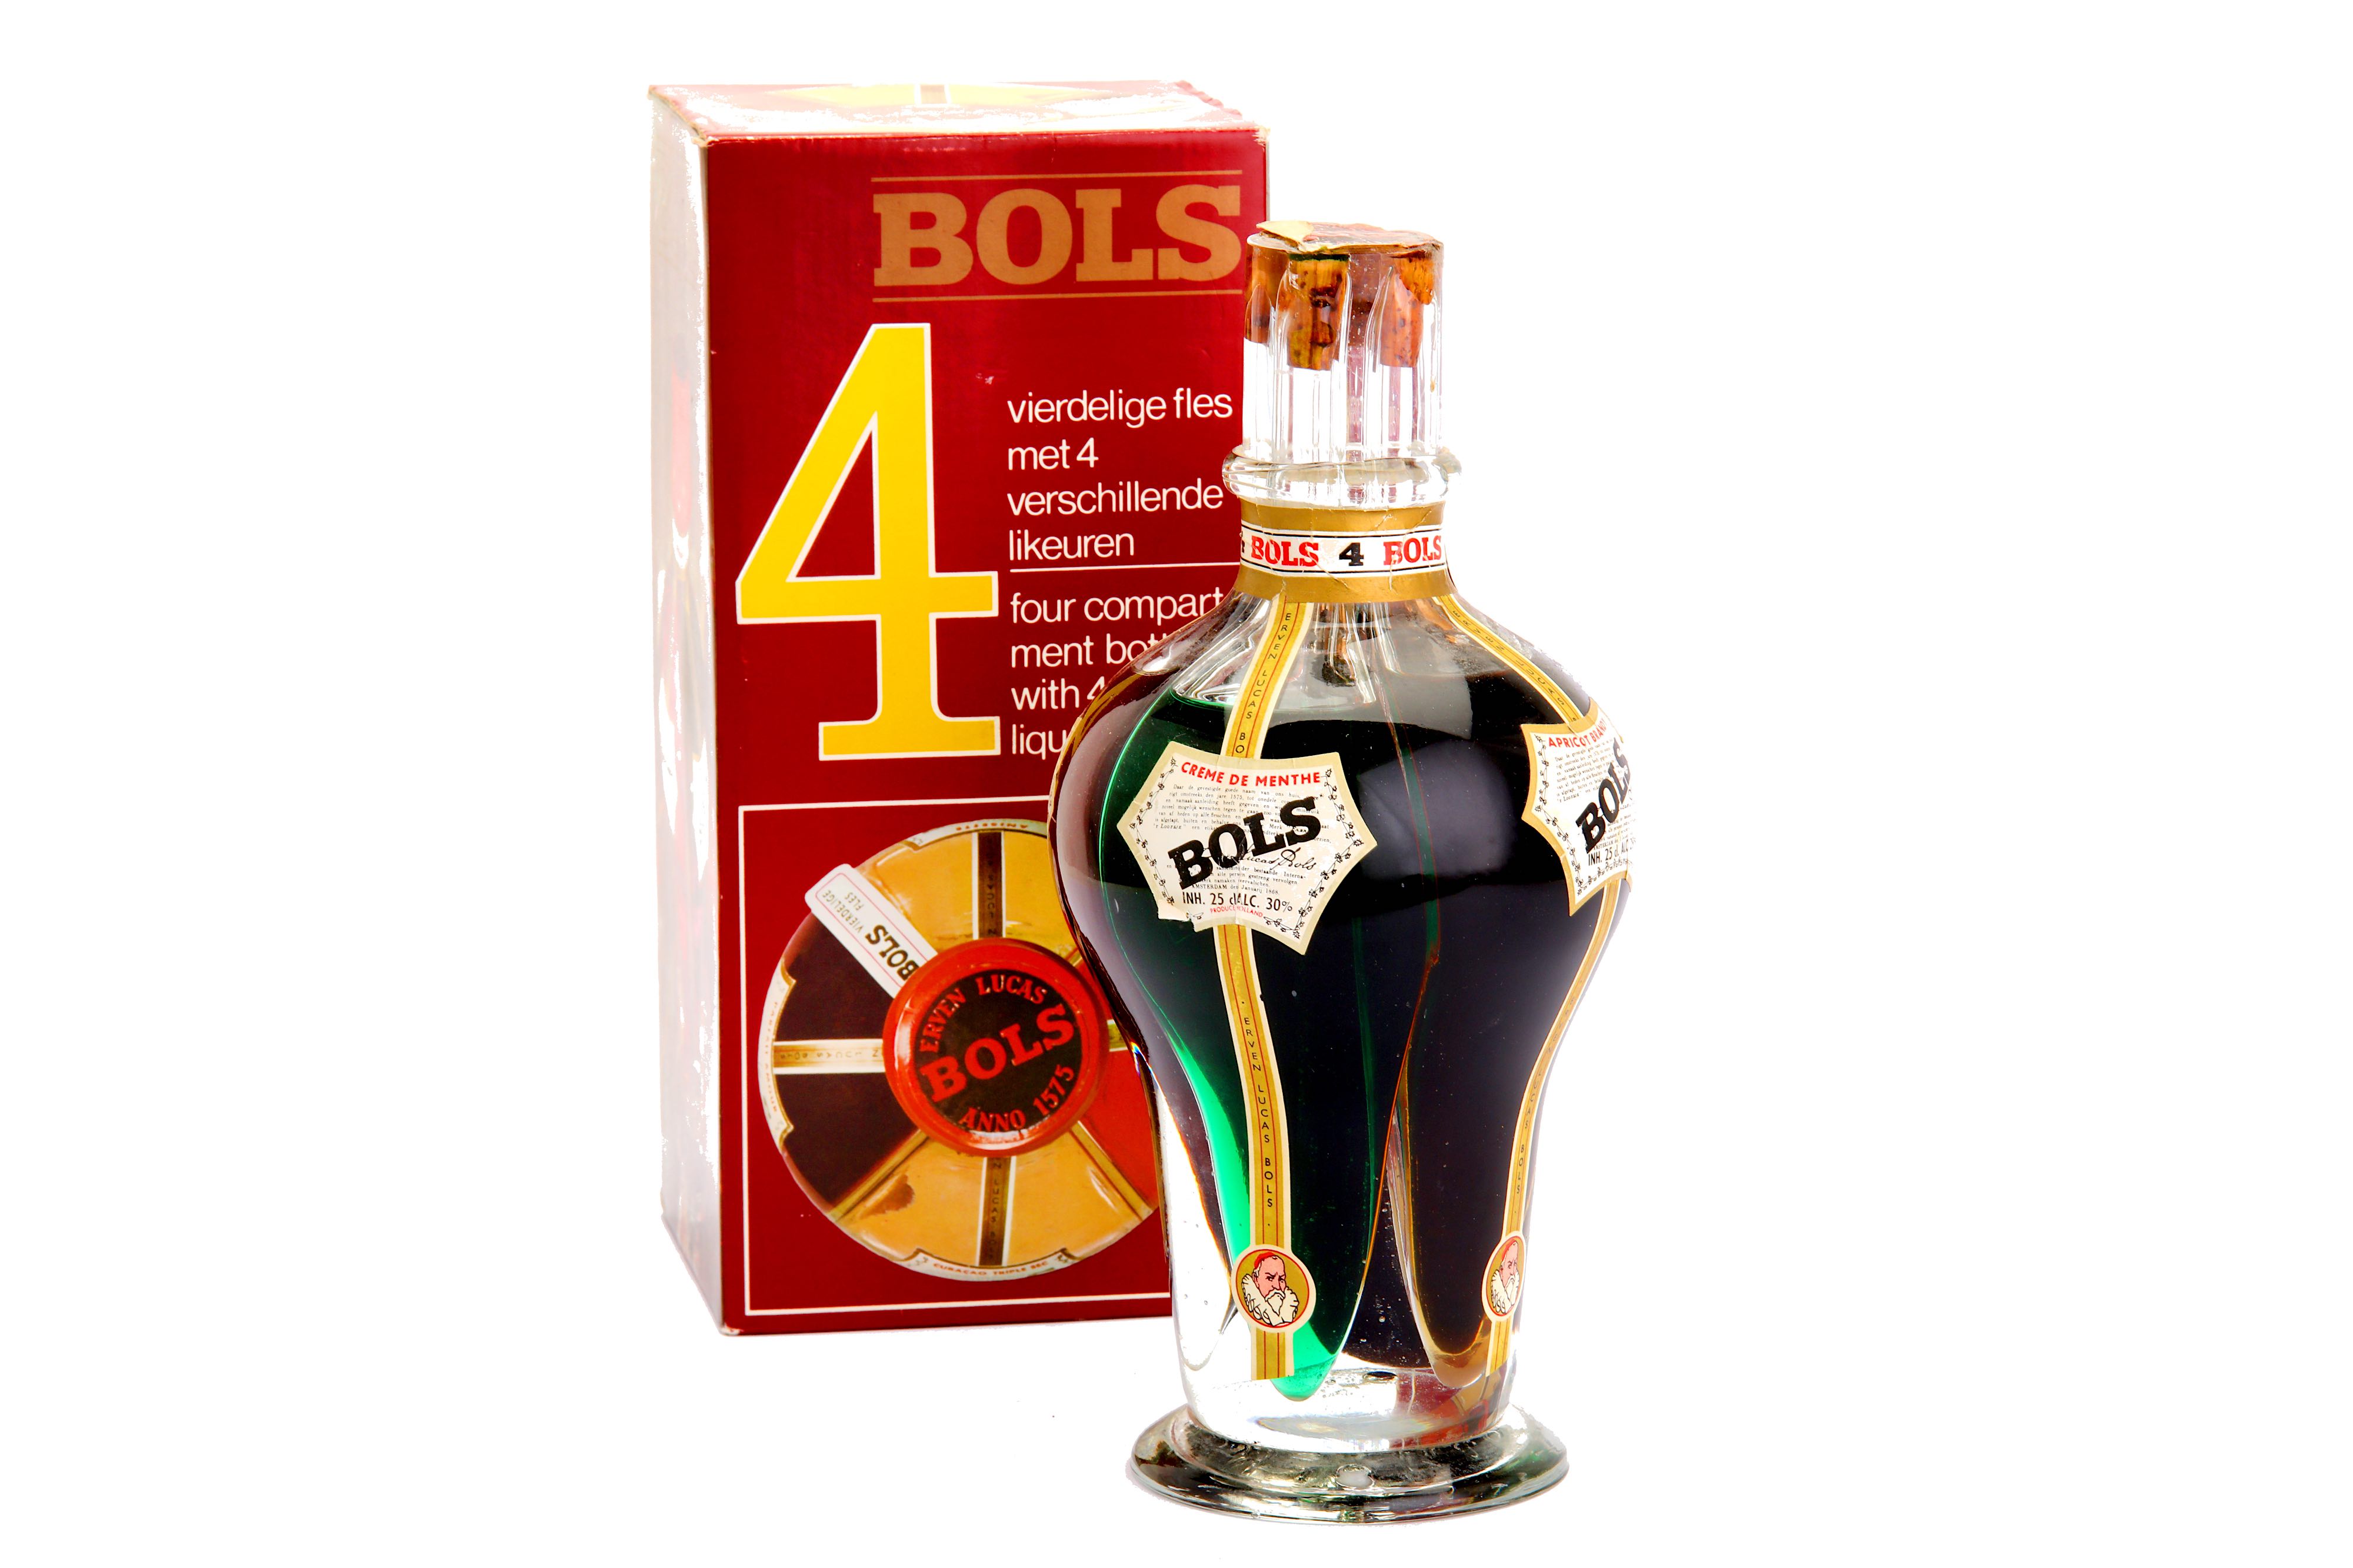 1 BOTTLE OF THE BOLS FOUR - FOUR LIQUEURS IN ONE